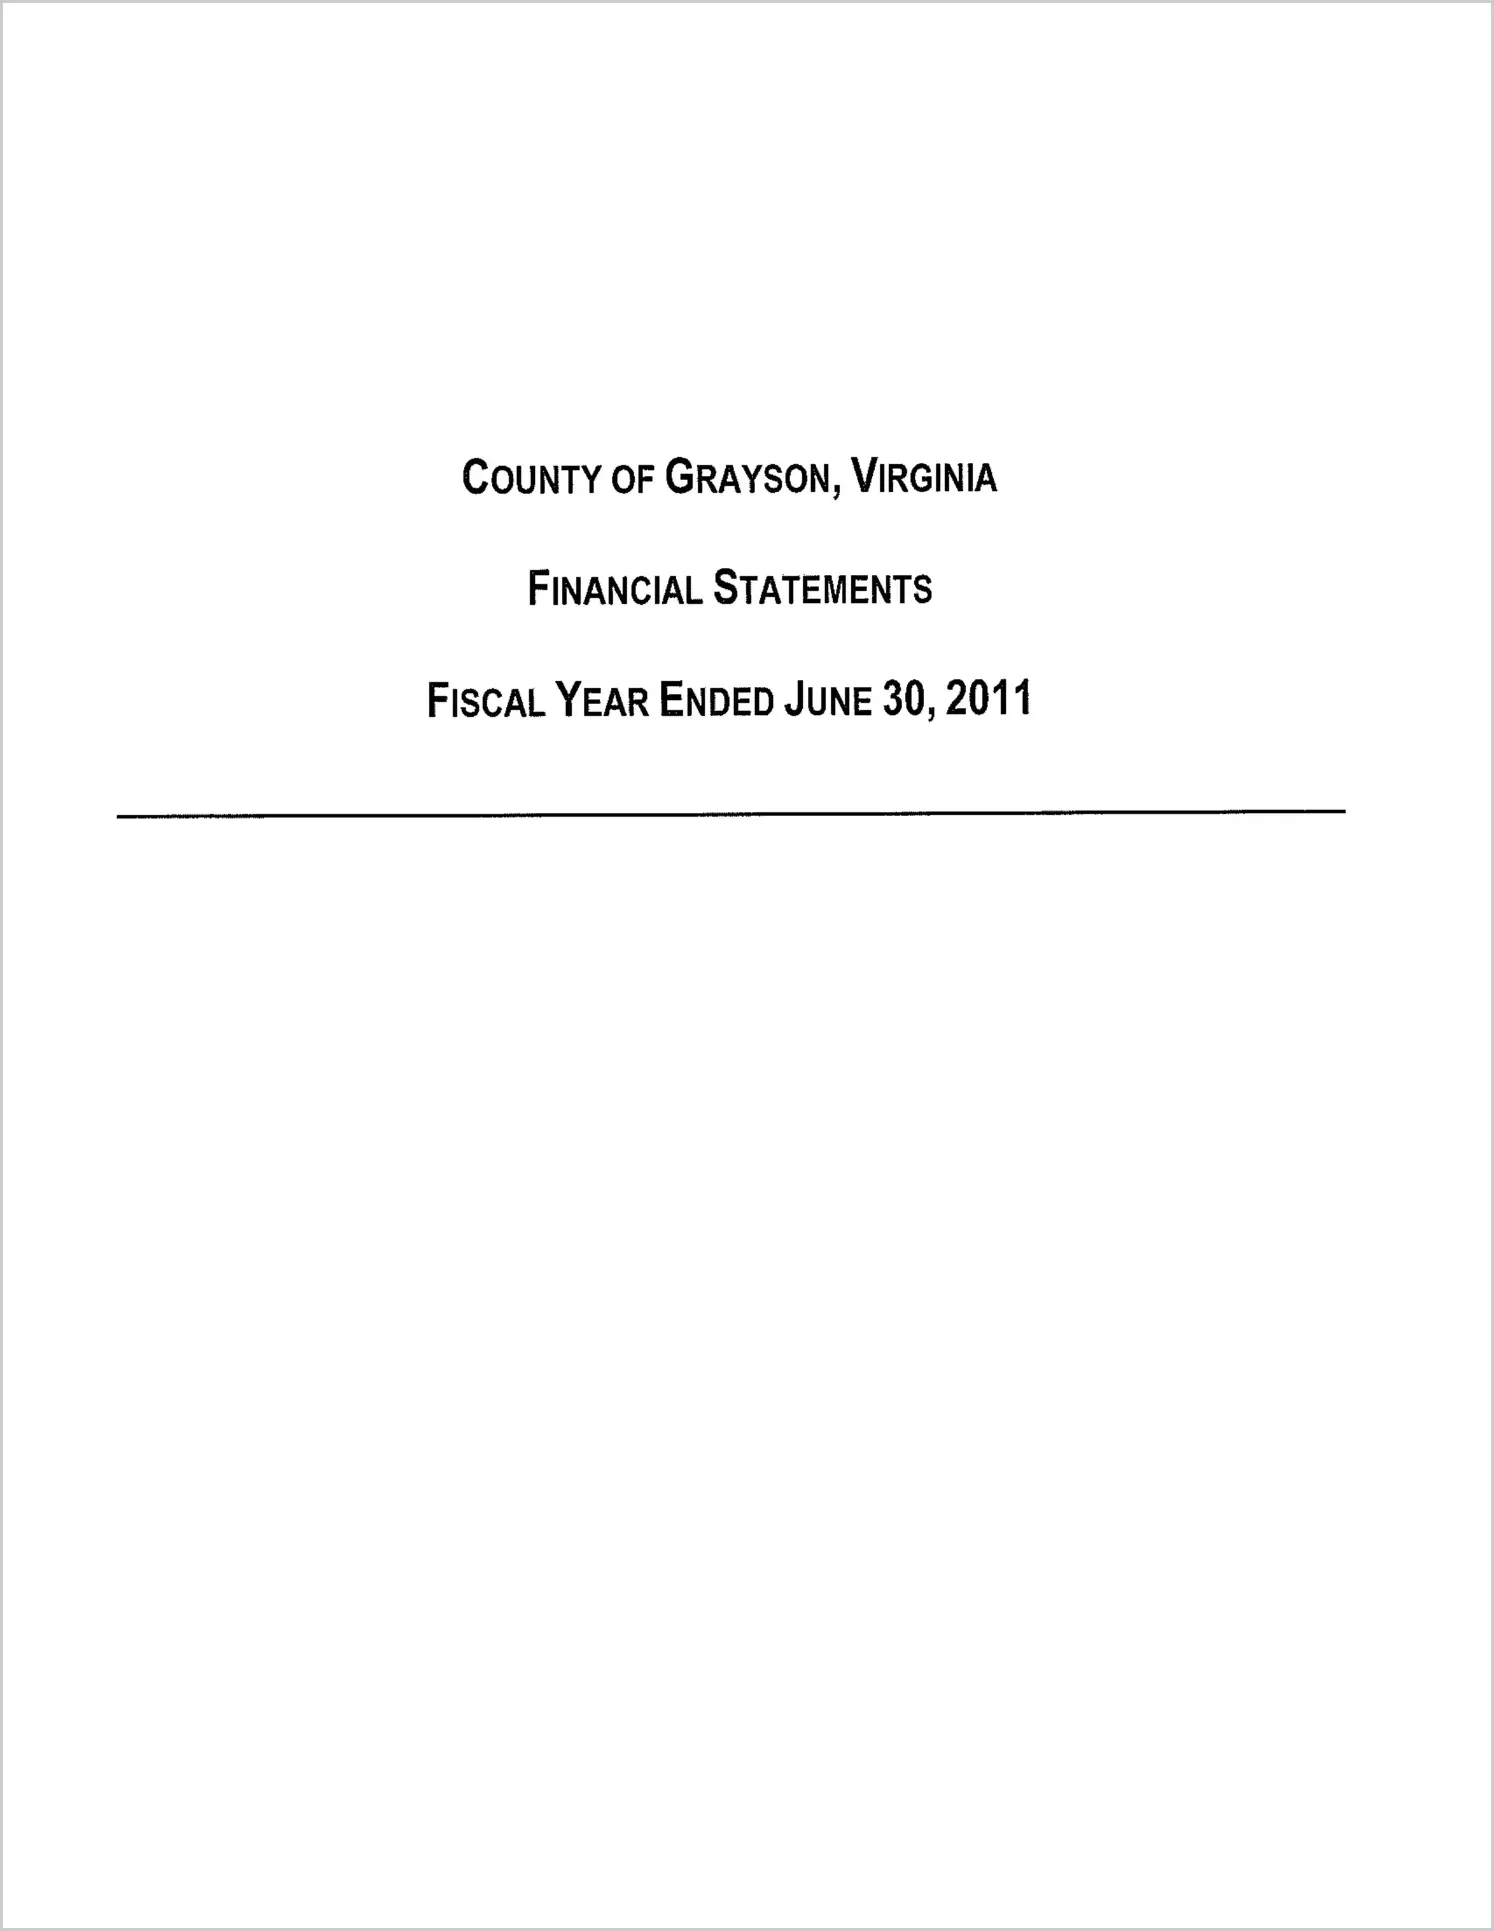 2011 Annual Financial Report for County of Grayson